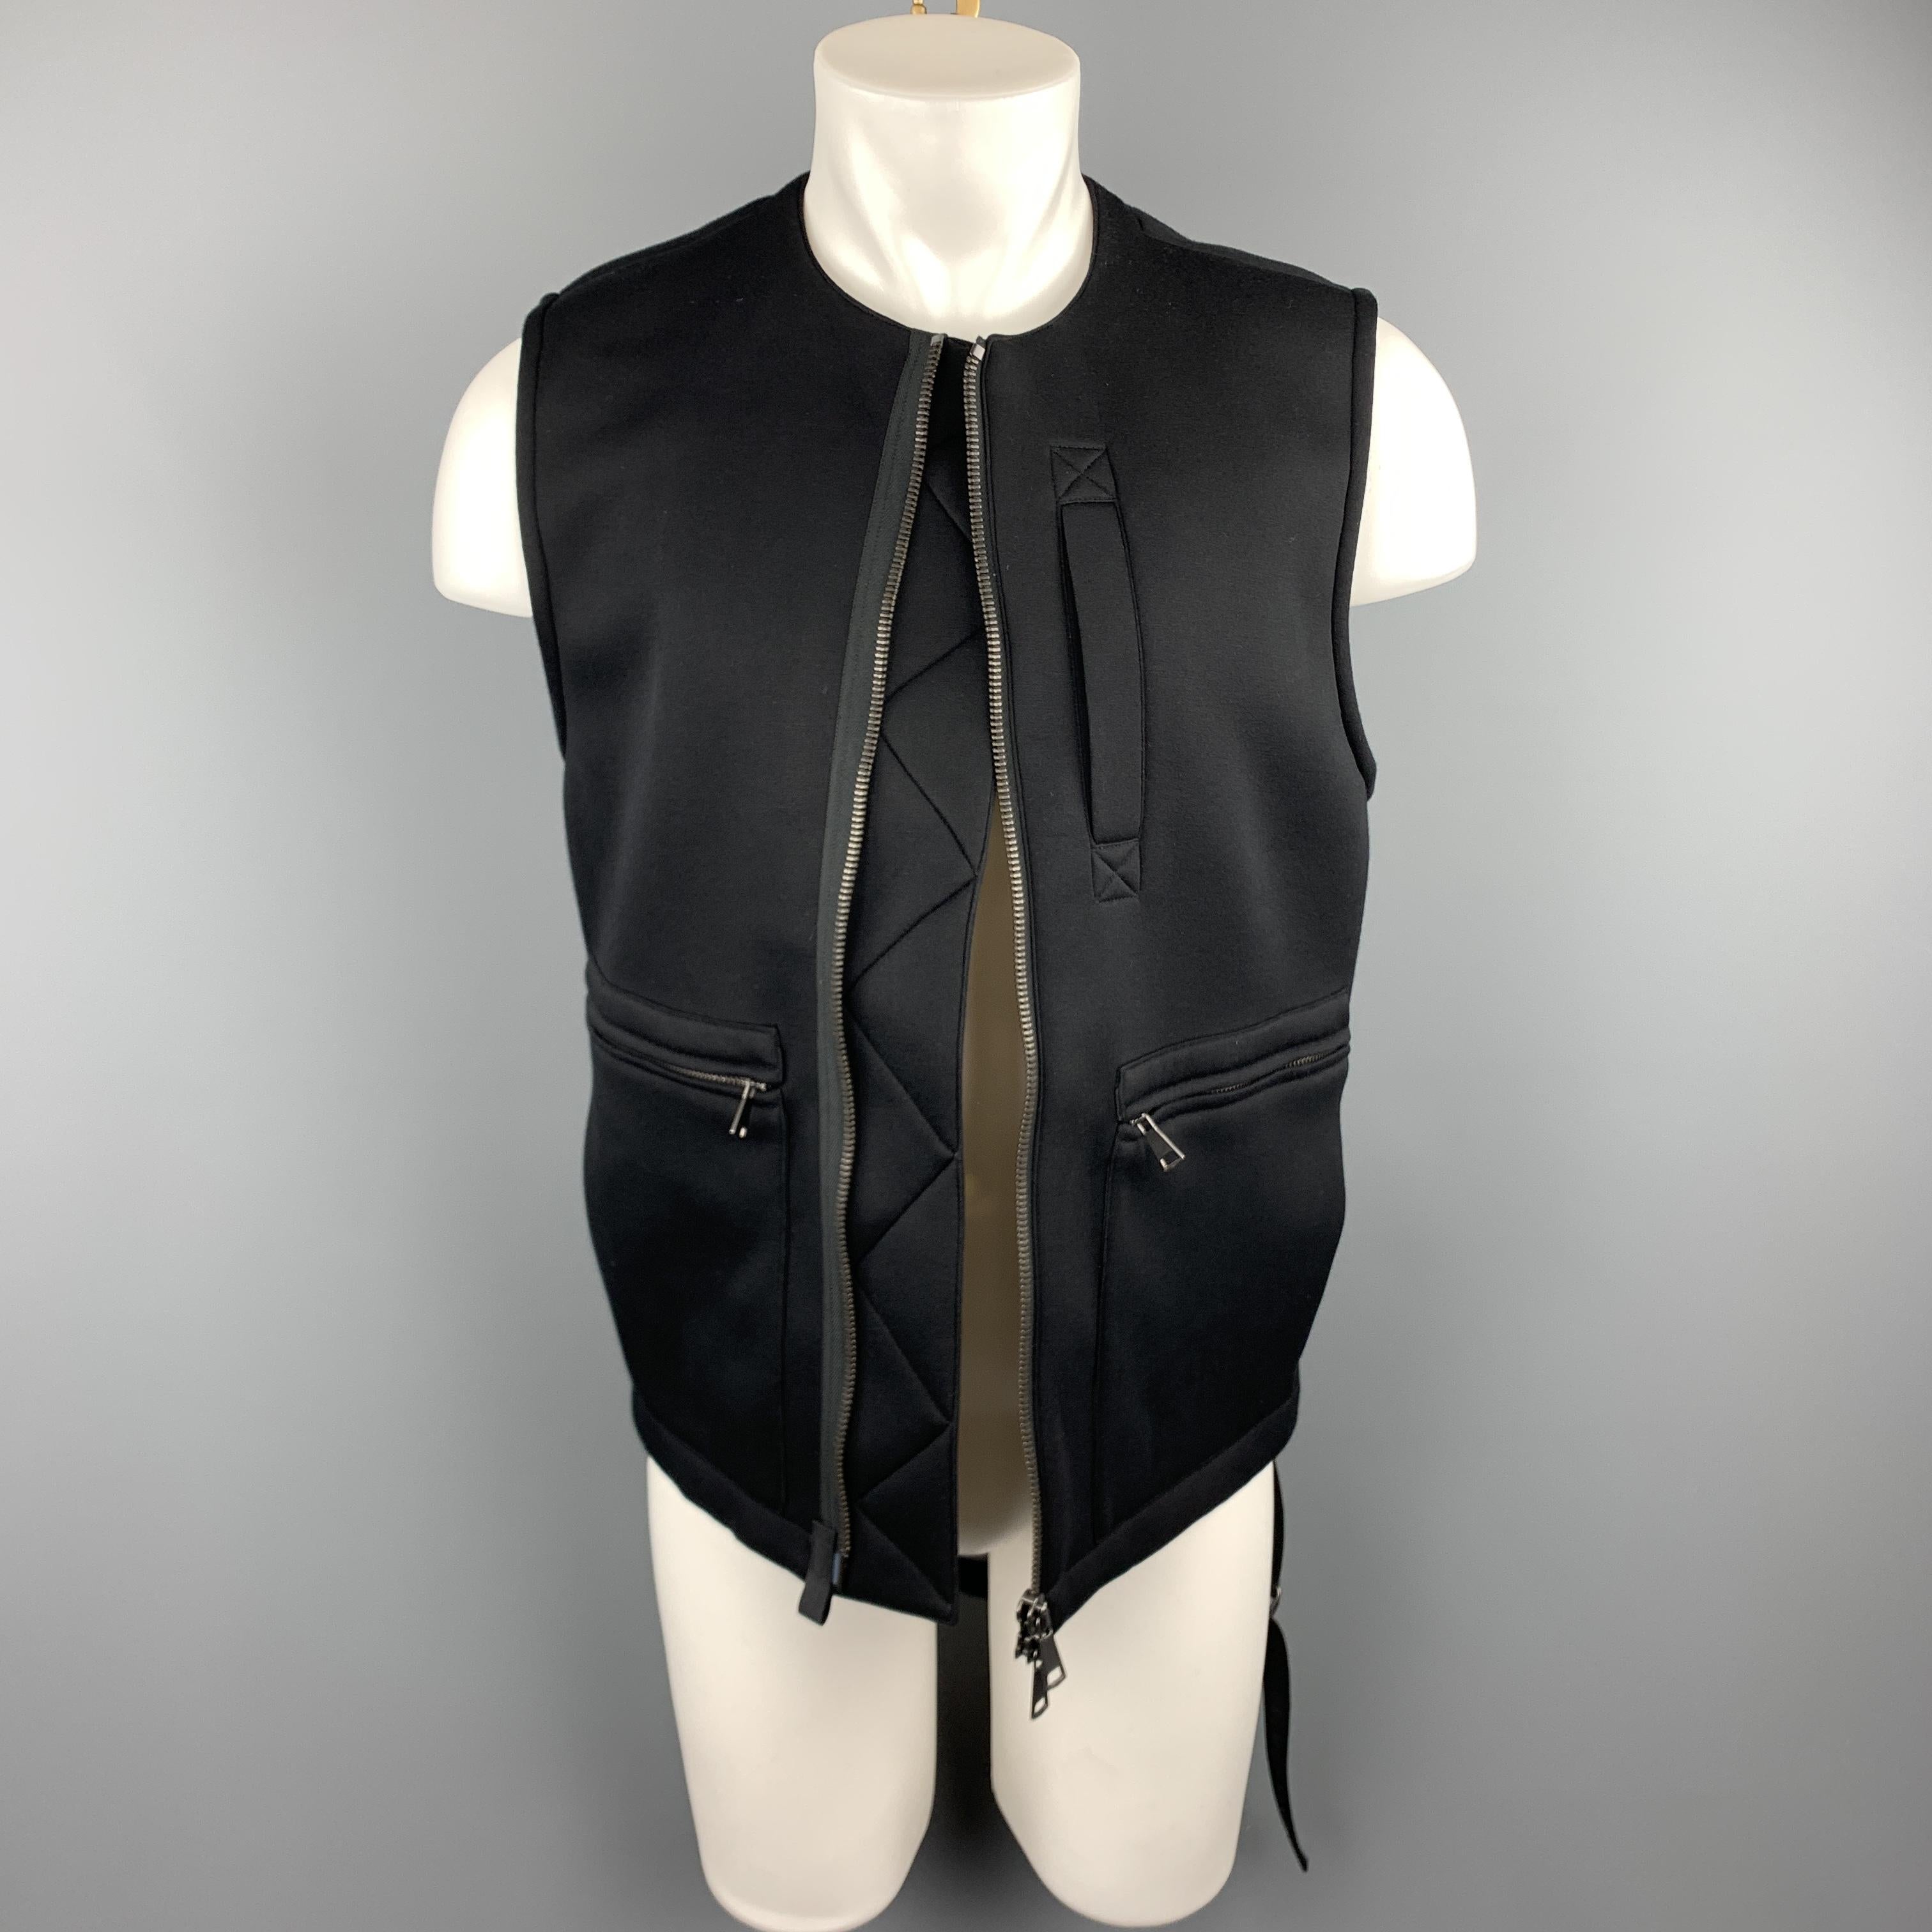 HELMUT LANG tactical style vest comes in black neoprene jersey with a round neck, zip pockets, quilted back waistband, and inner bondage strap. Made in USA.

Excellent Pre-Owned Condition.
Marked: M

Measurements:

Shoulder: 16 in.
Chest: 42